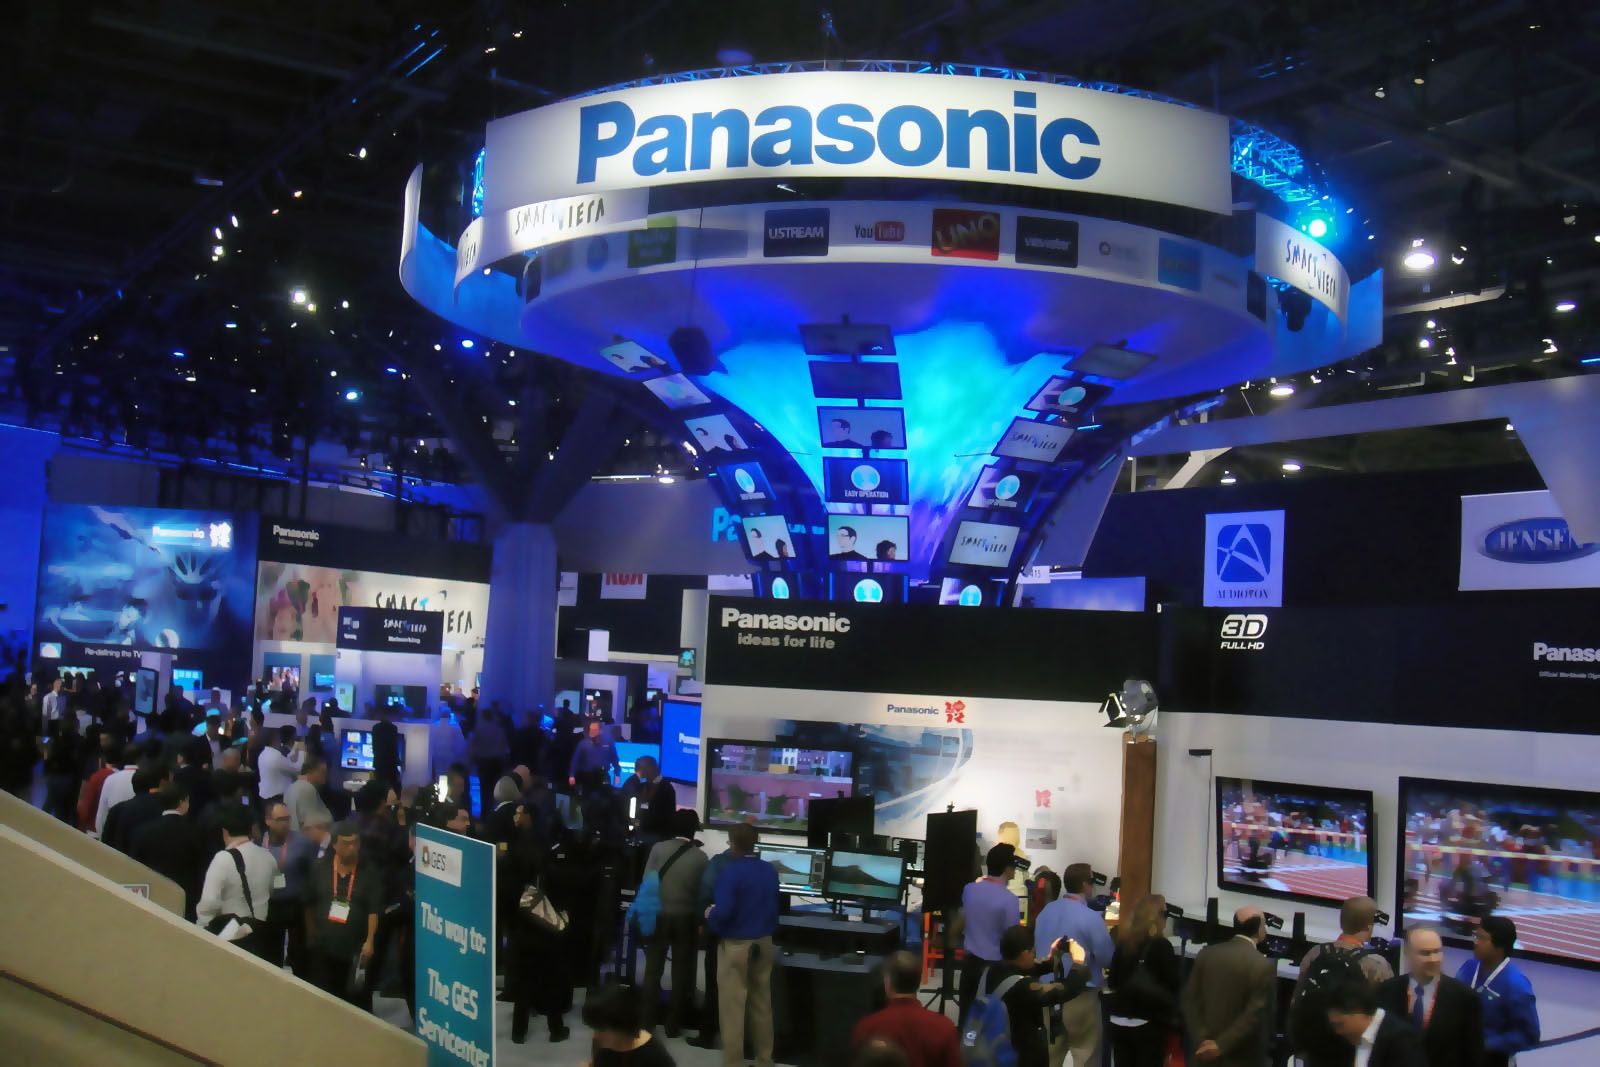 Panasonic CES 2018 press conference How to watch it image 1